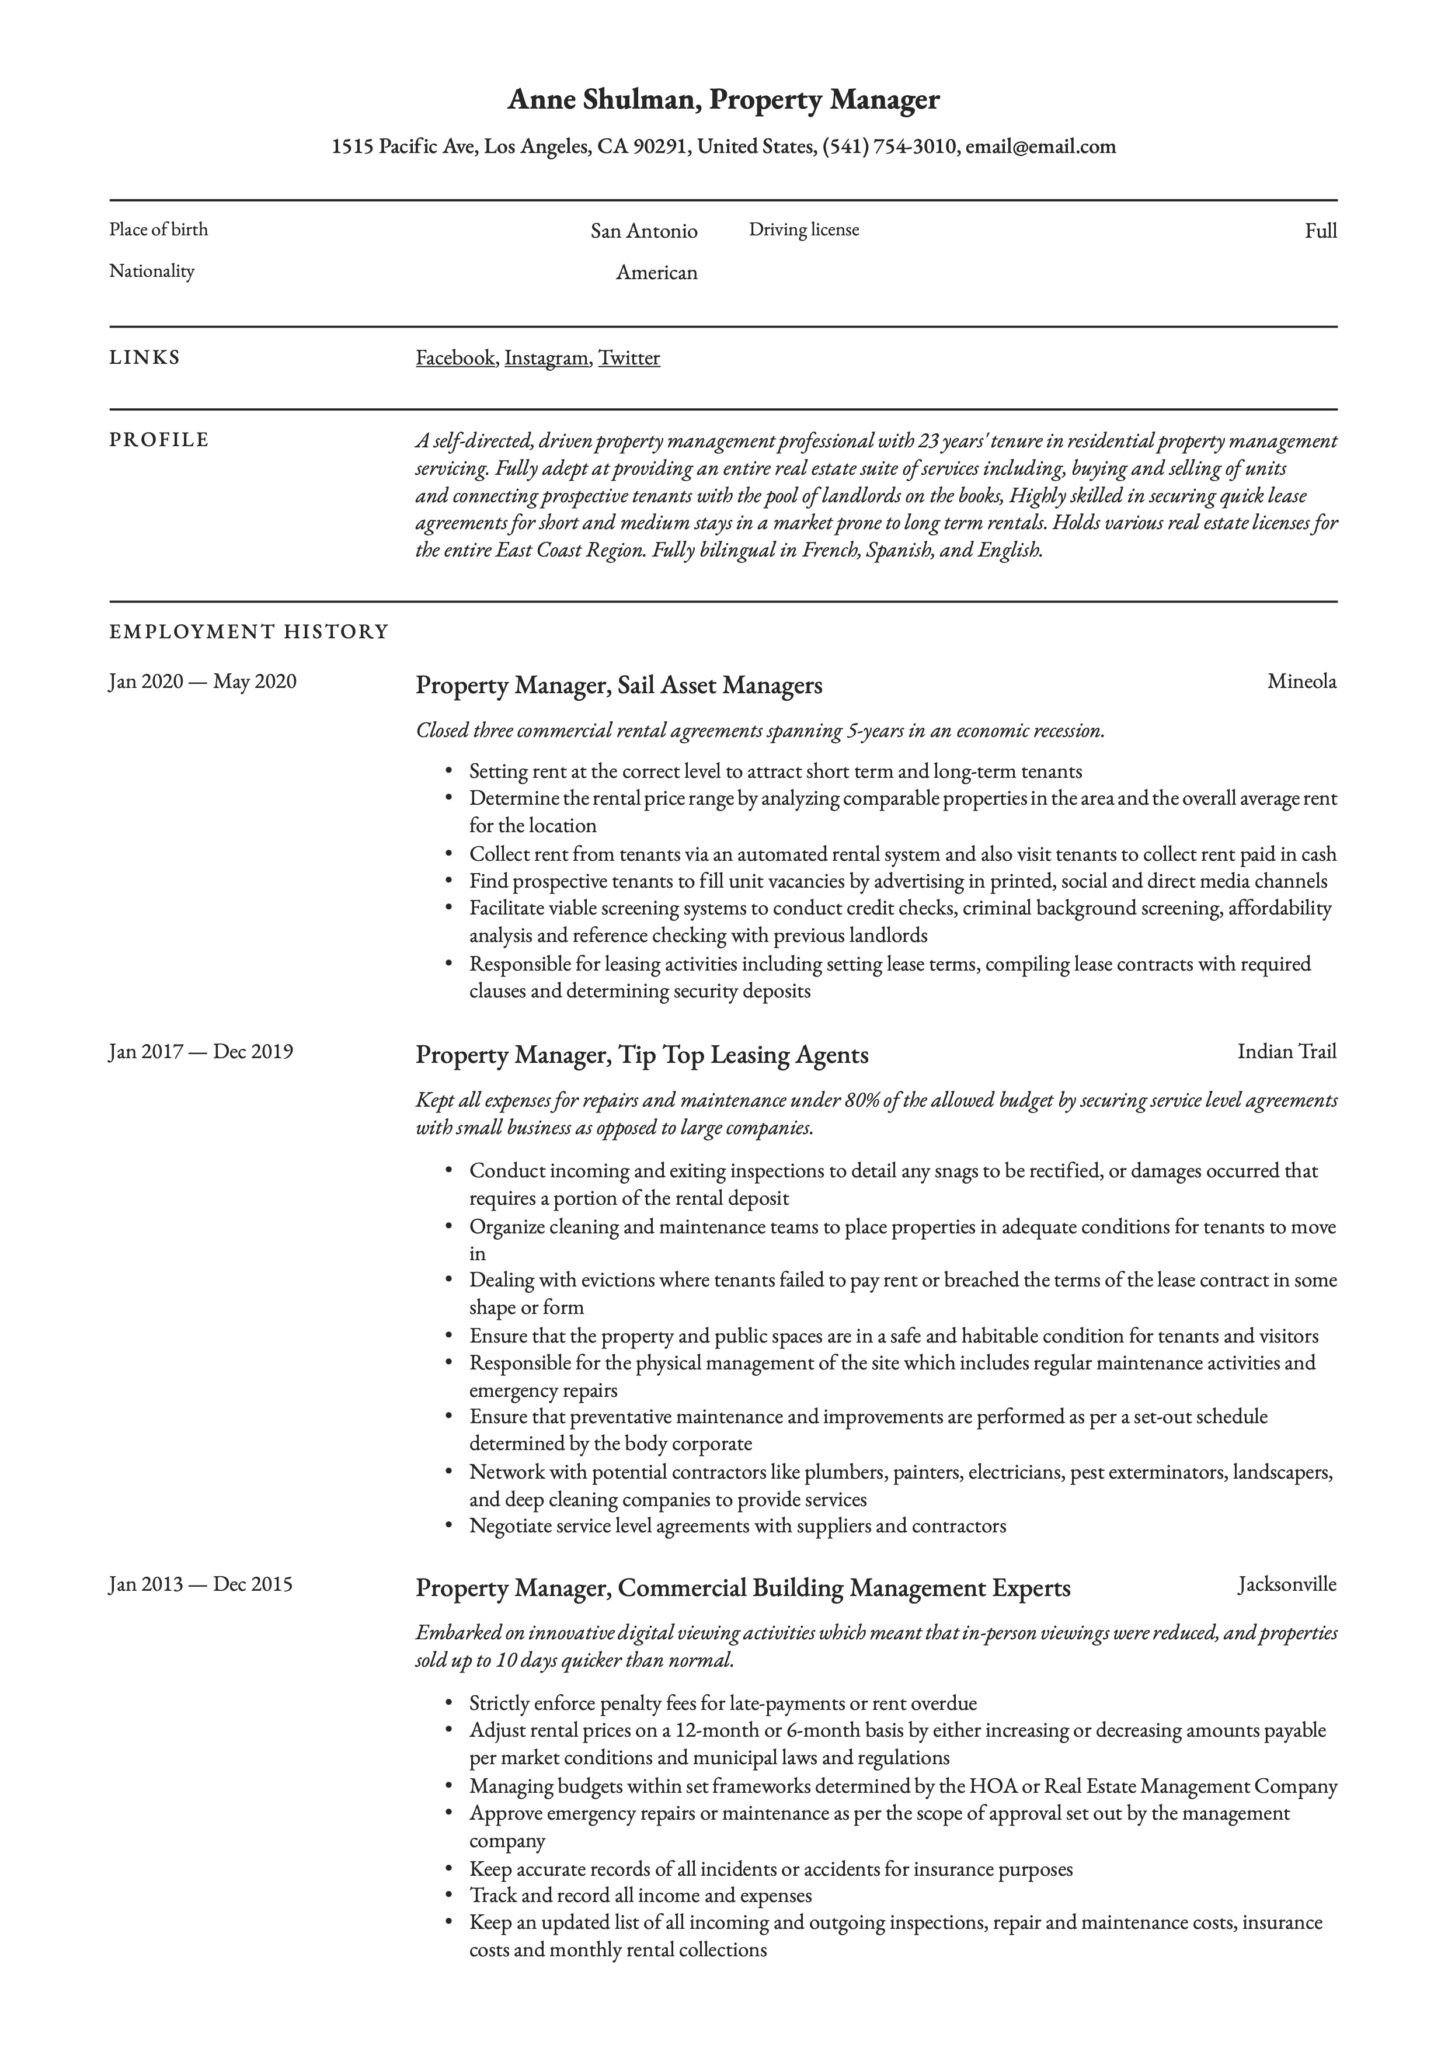 Resume Template for Apartment Property Manager Property Manager Resume & Writing Guide  18 Templates 2020